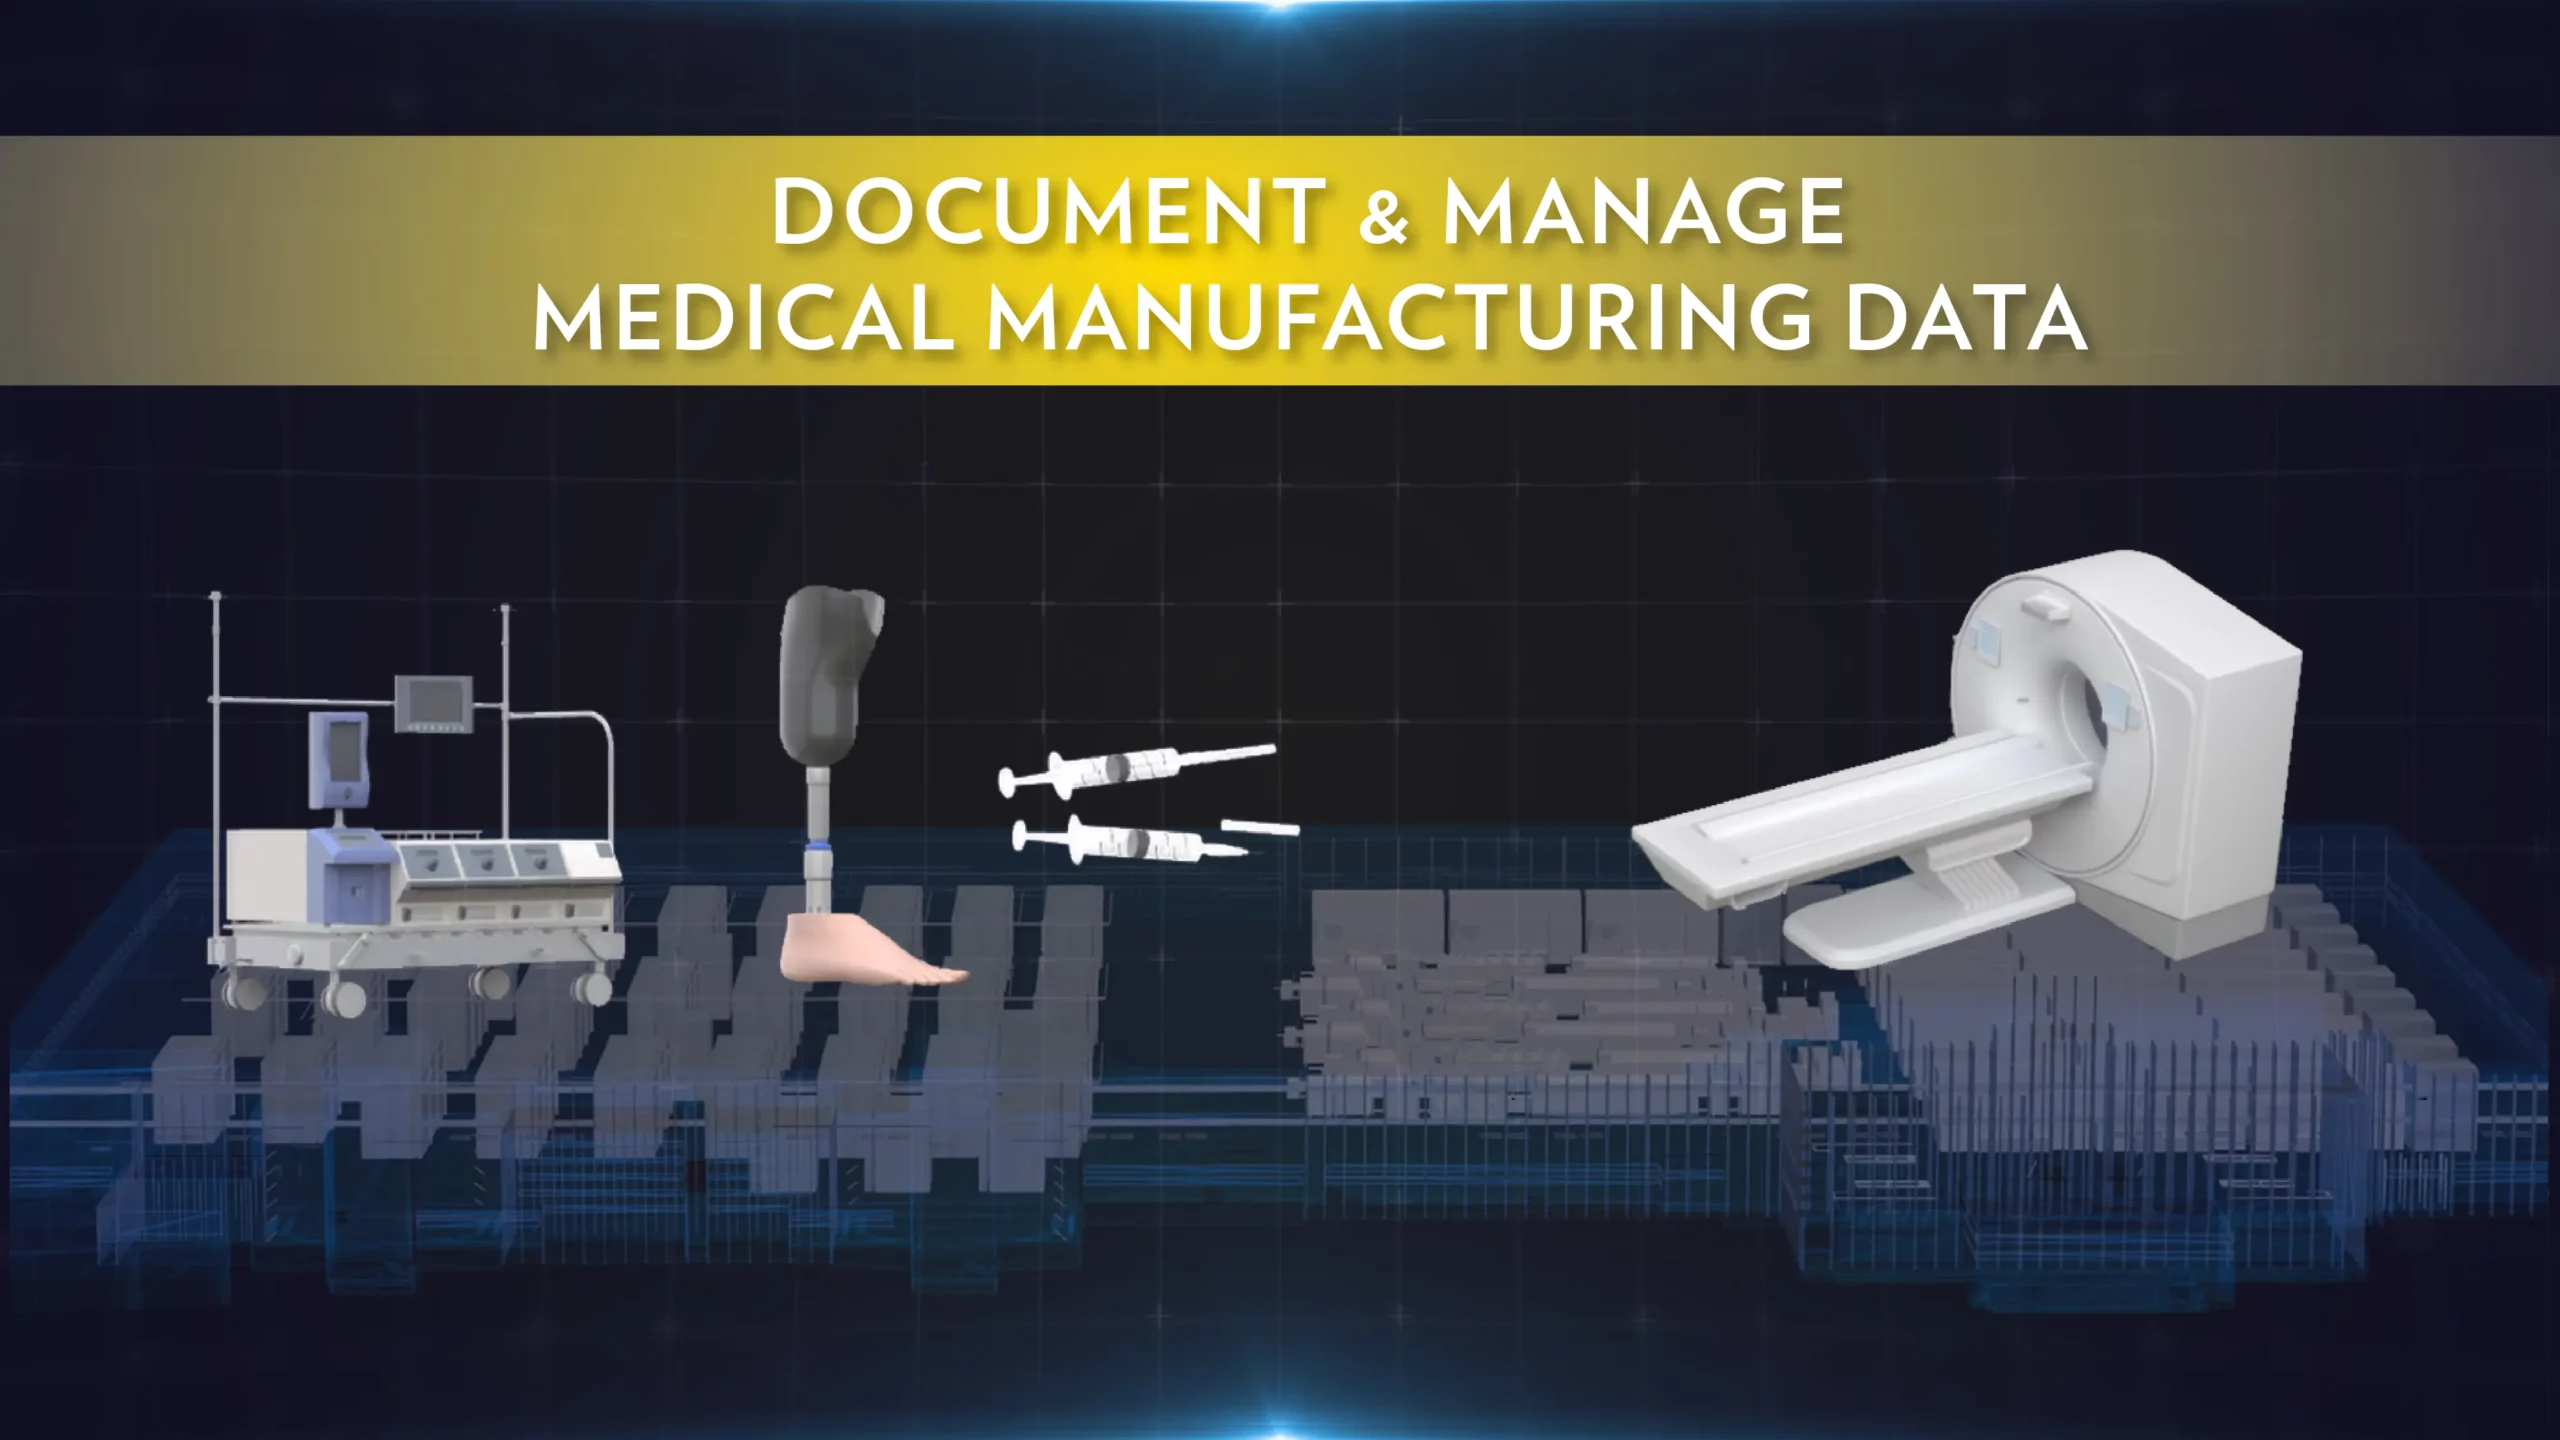 How the medical devices industry can benefit from the right MES to ensure compliance, traceability, and quality control of outputs.